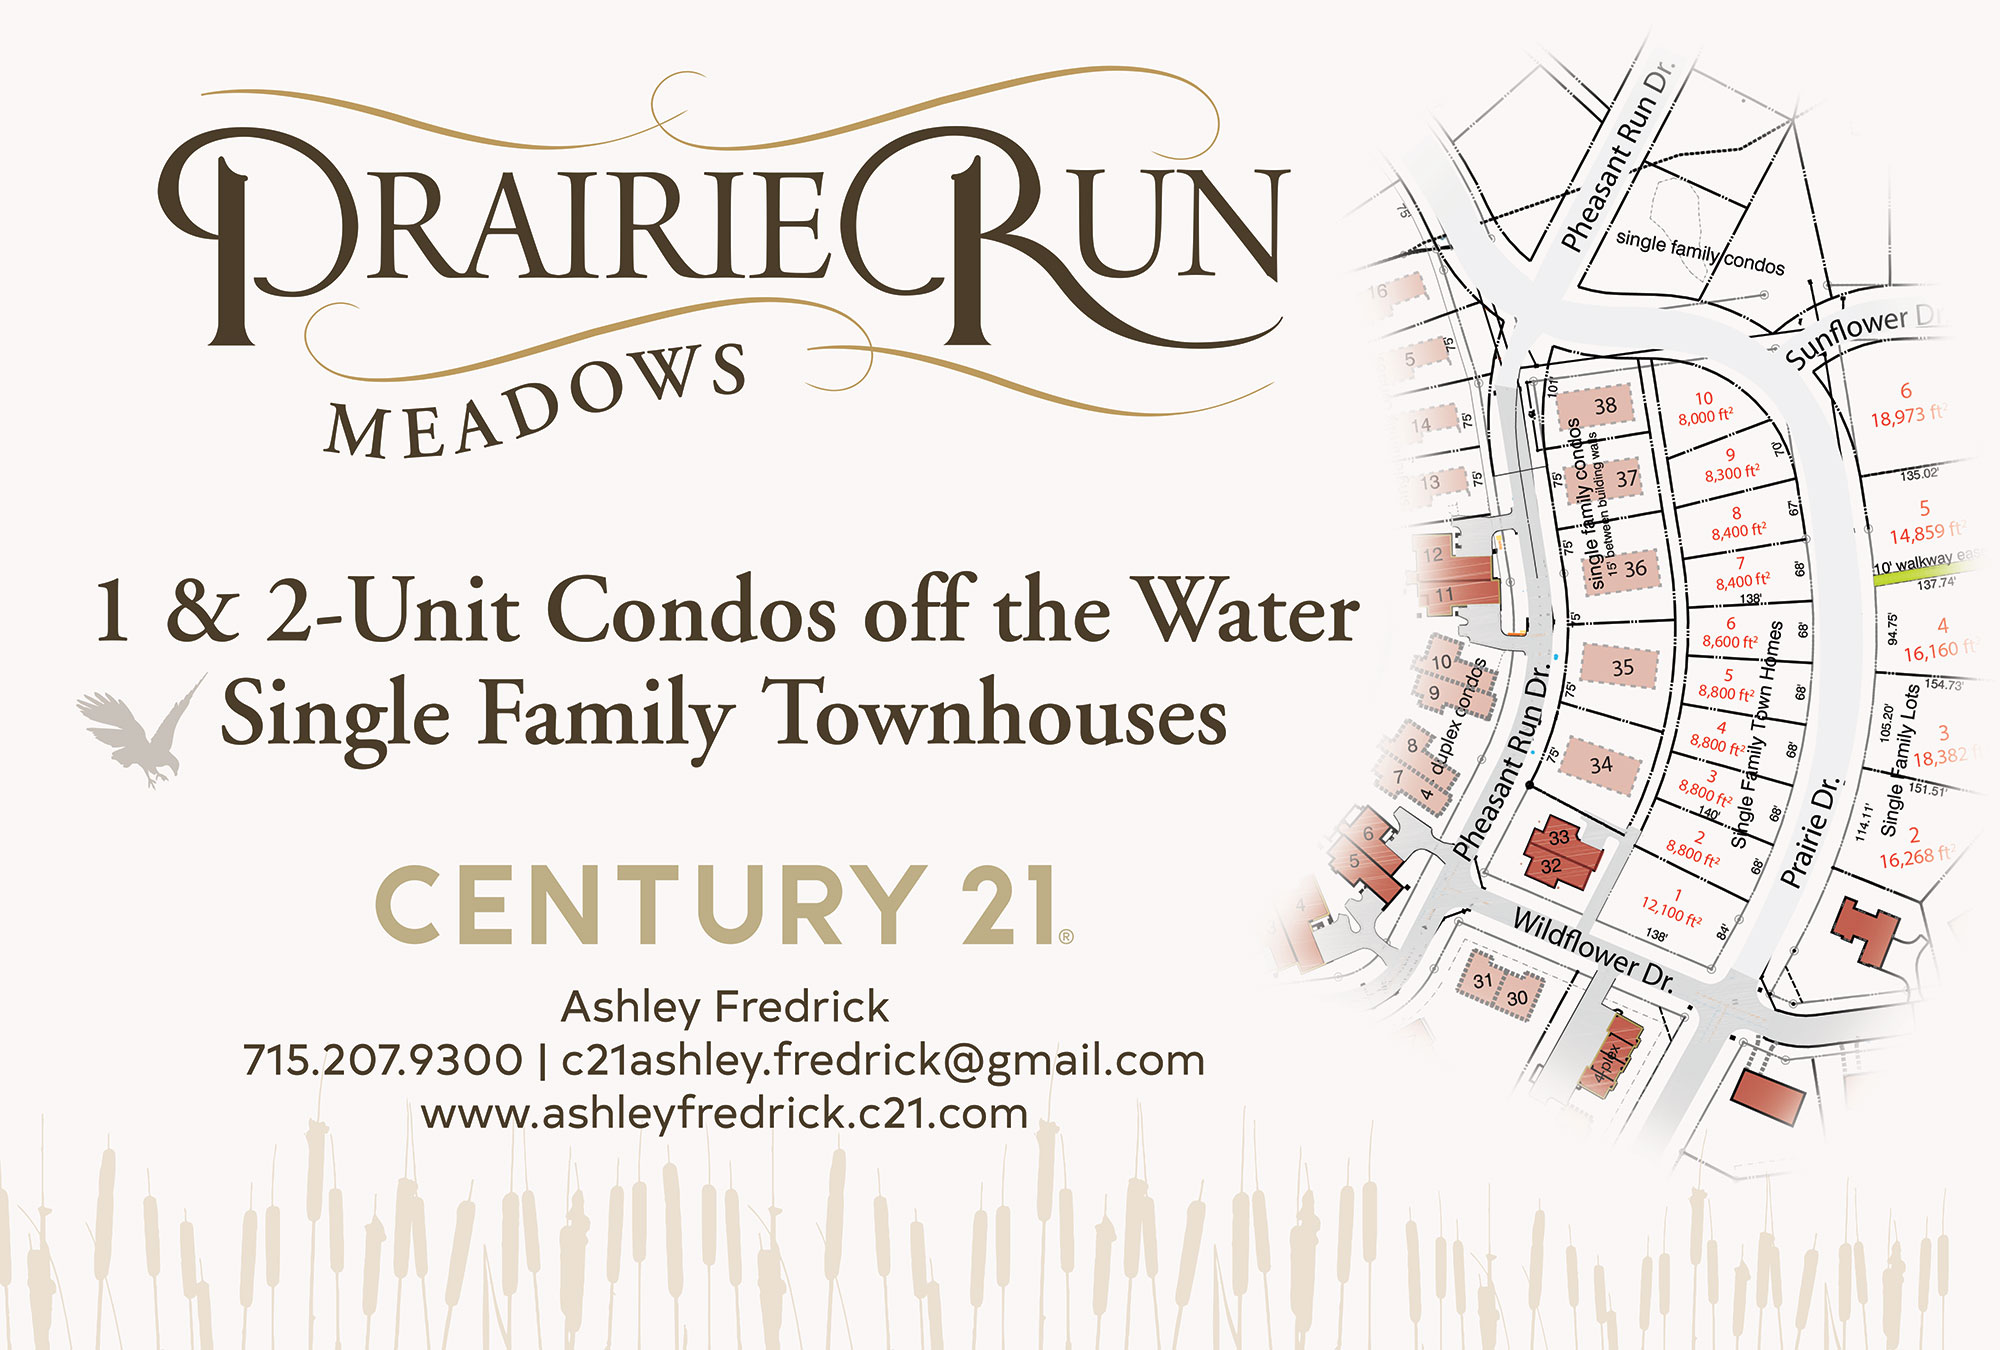 Prairie Run Meadows existing infrastructure and lot map. Off the water 1 & 2 unit condominiums and single family townhouses